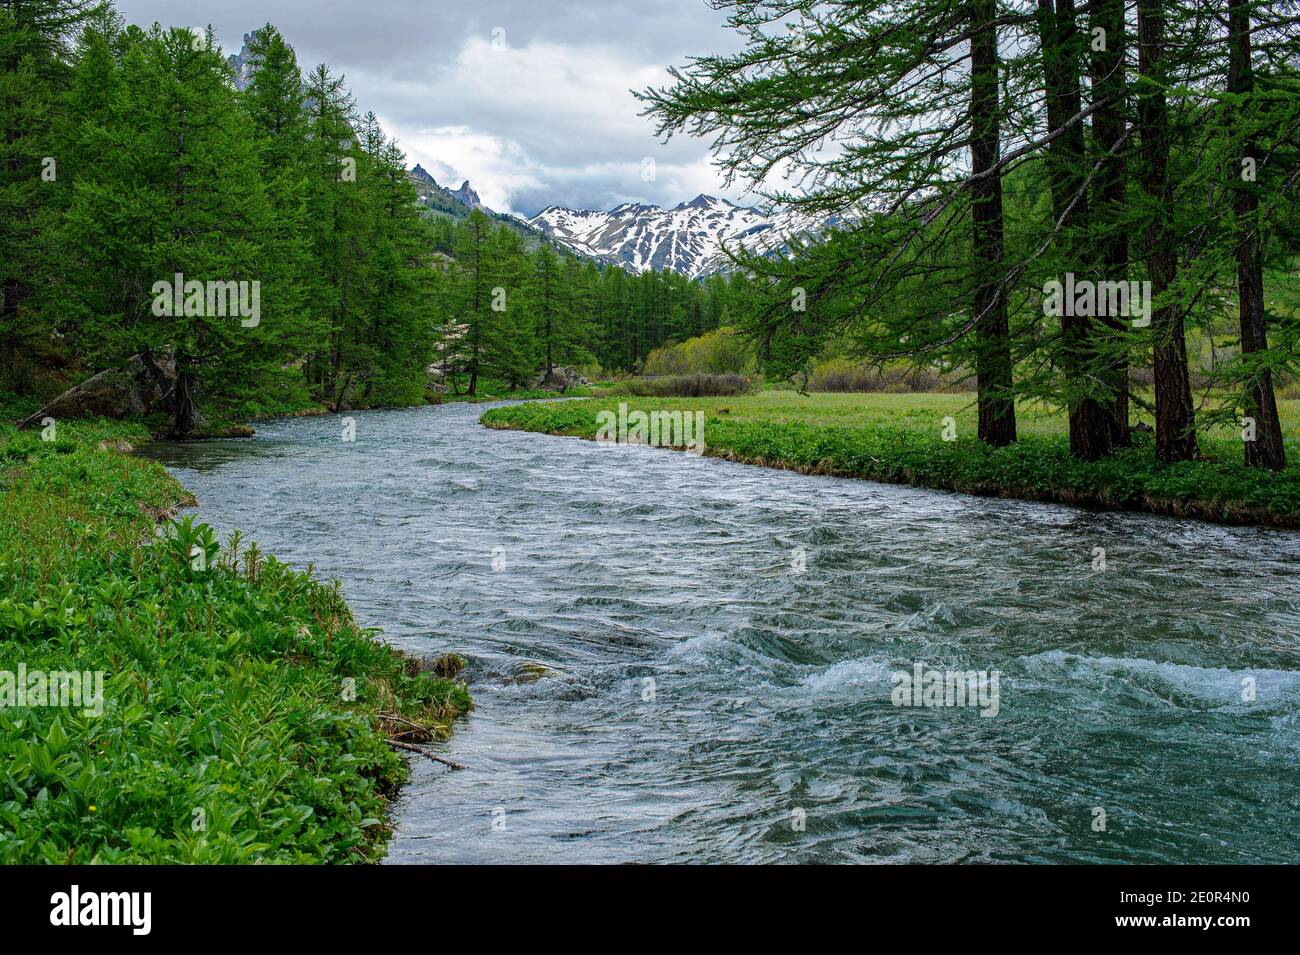 View of the Claree River in the Hautes-Alpes. The banks are covered with grass and, in the background, some mountains still bearing snow patches. Stock Photo